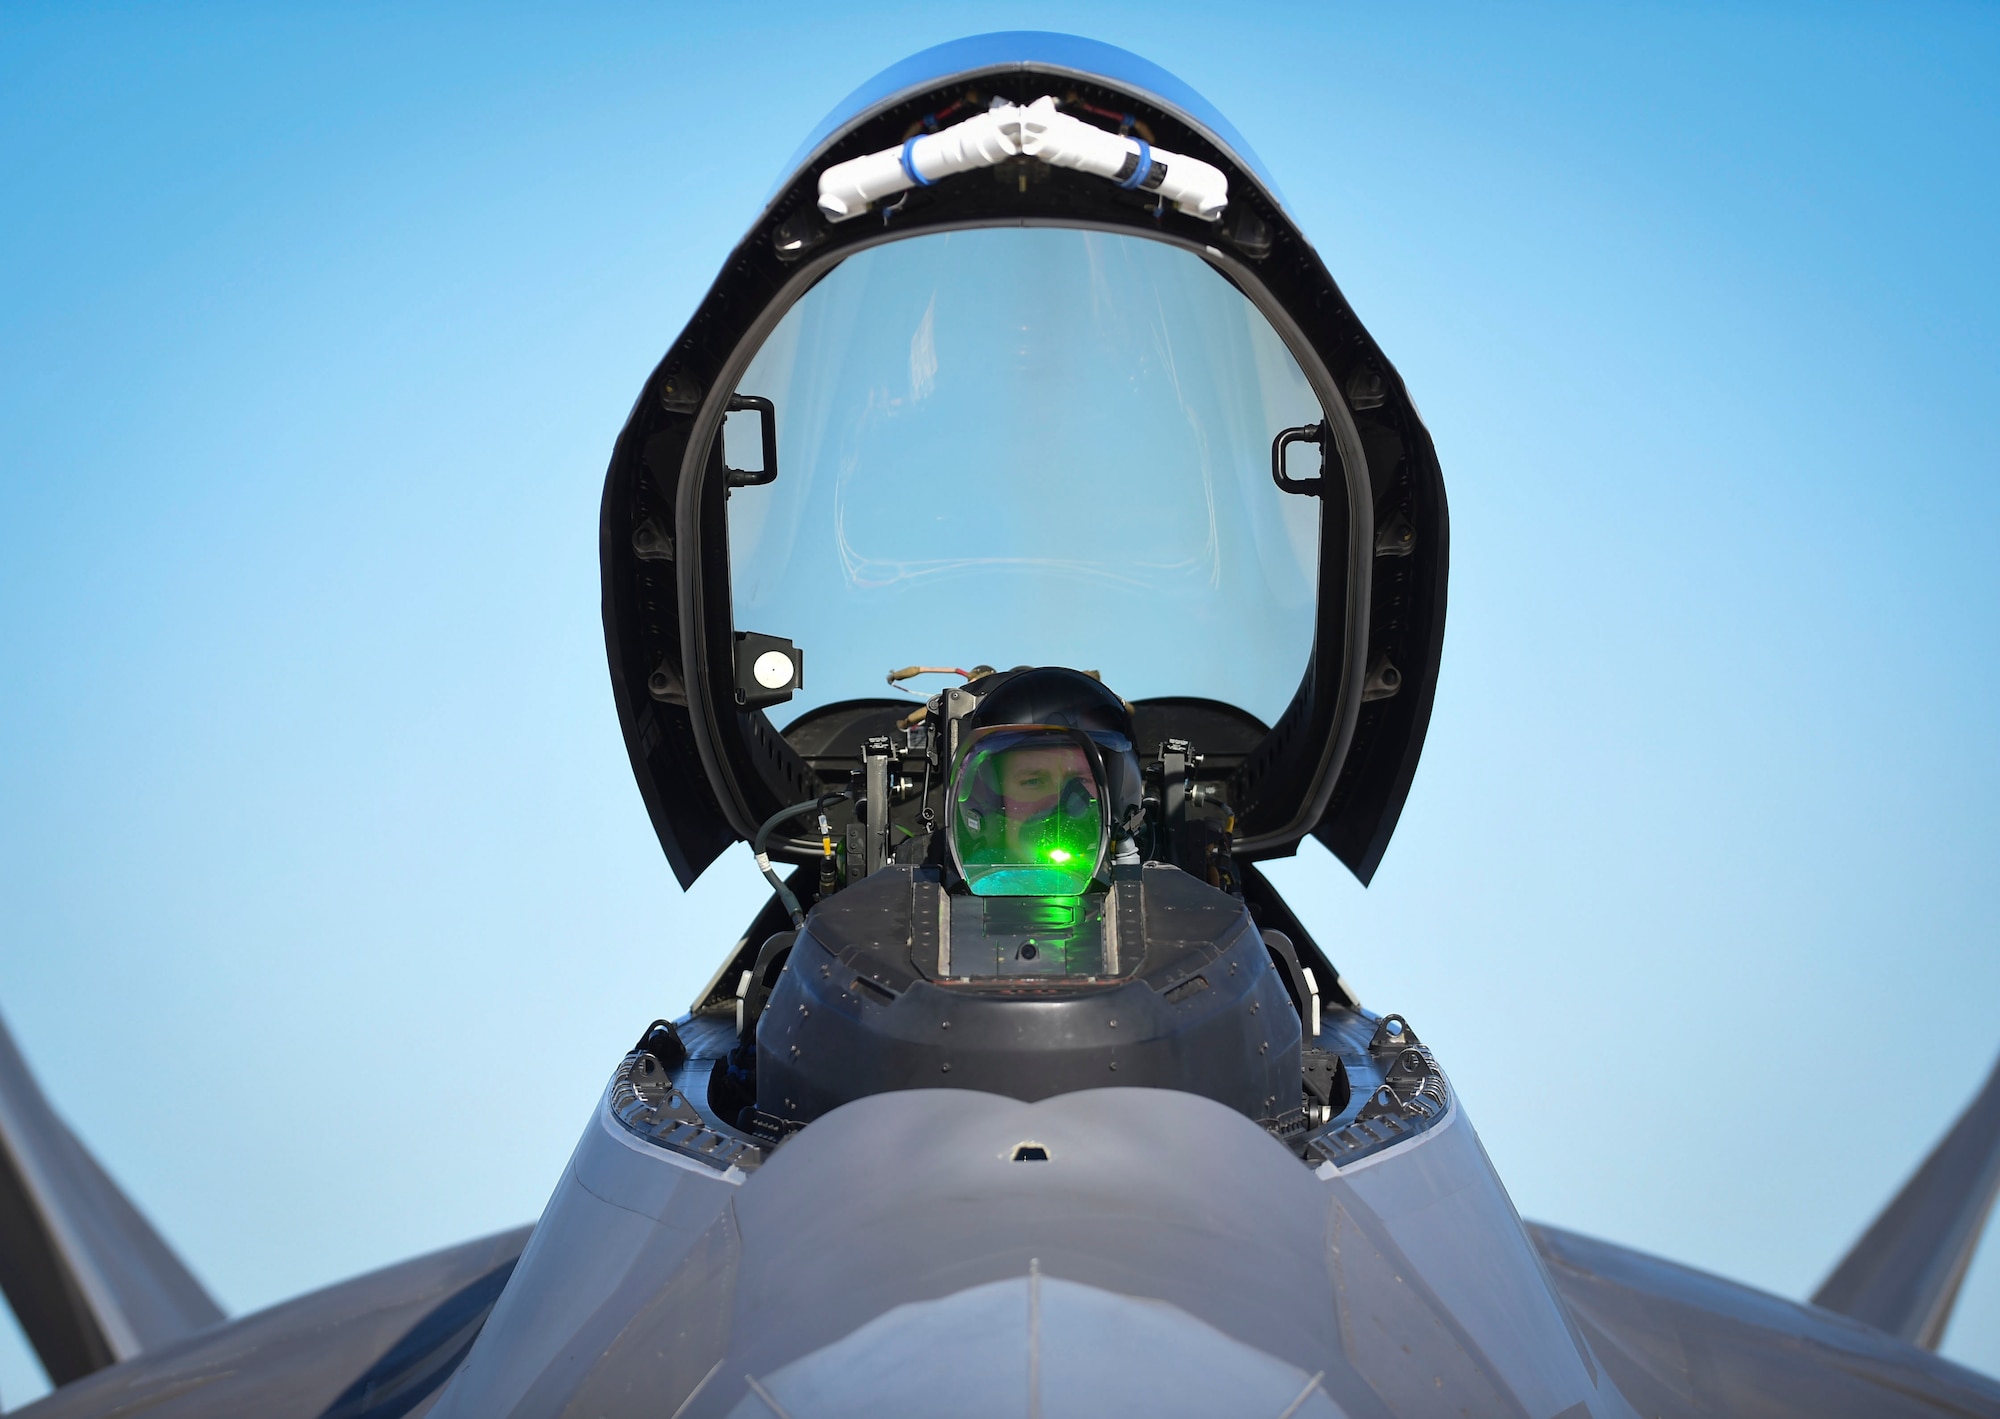 A 1st Fighter Wing F-22 Raptor pilot secures his helmet before takeoff during Red Flag 17-1 at Nellis Air Force Base, Nev., Jan 26, 2017. This is the first Red Flag in which Raptors are working alongside F-35A Lightning II’s to secure air dominance and provide cover for fourth generation assets. (U.S Air Force photo by Staff Sgt. Natasha Stannard)